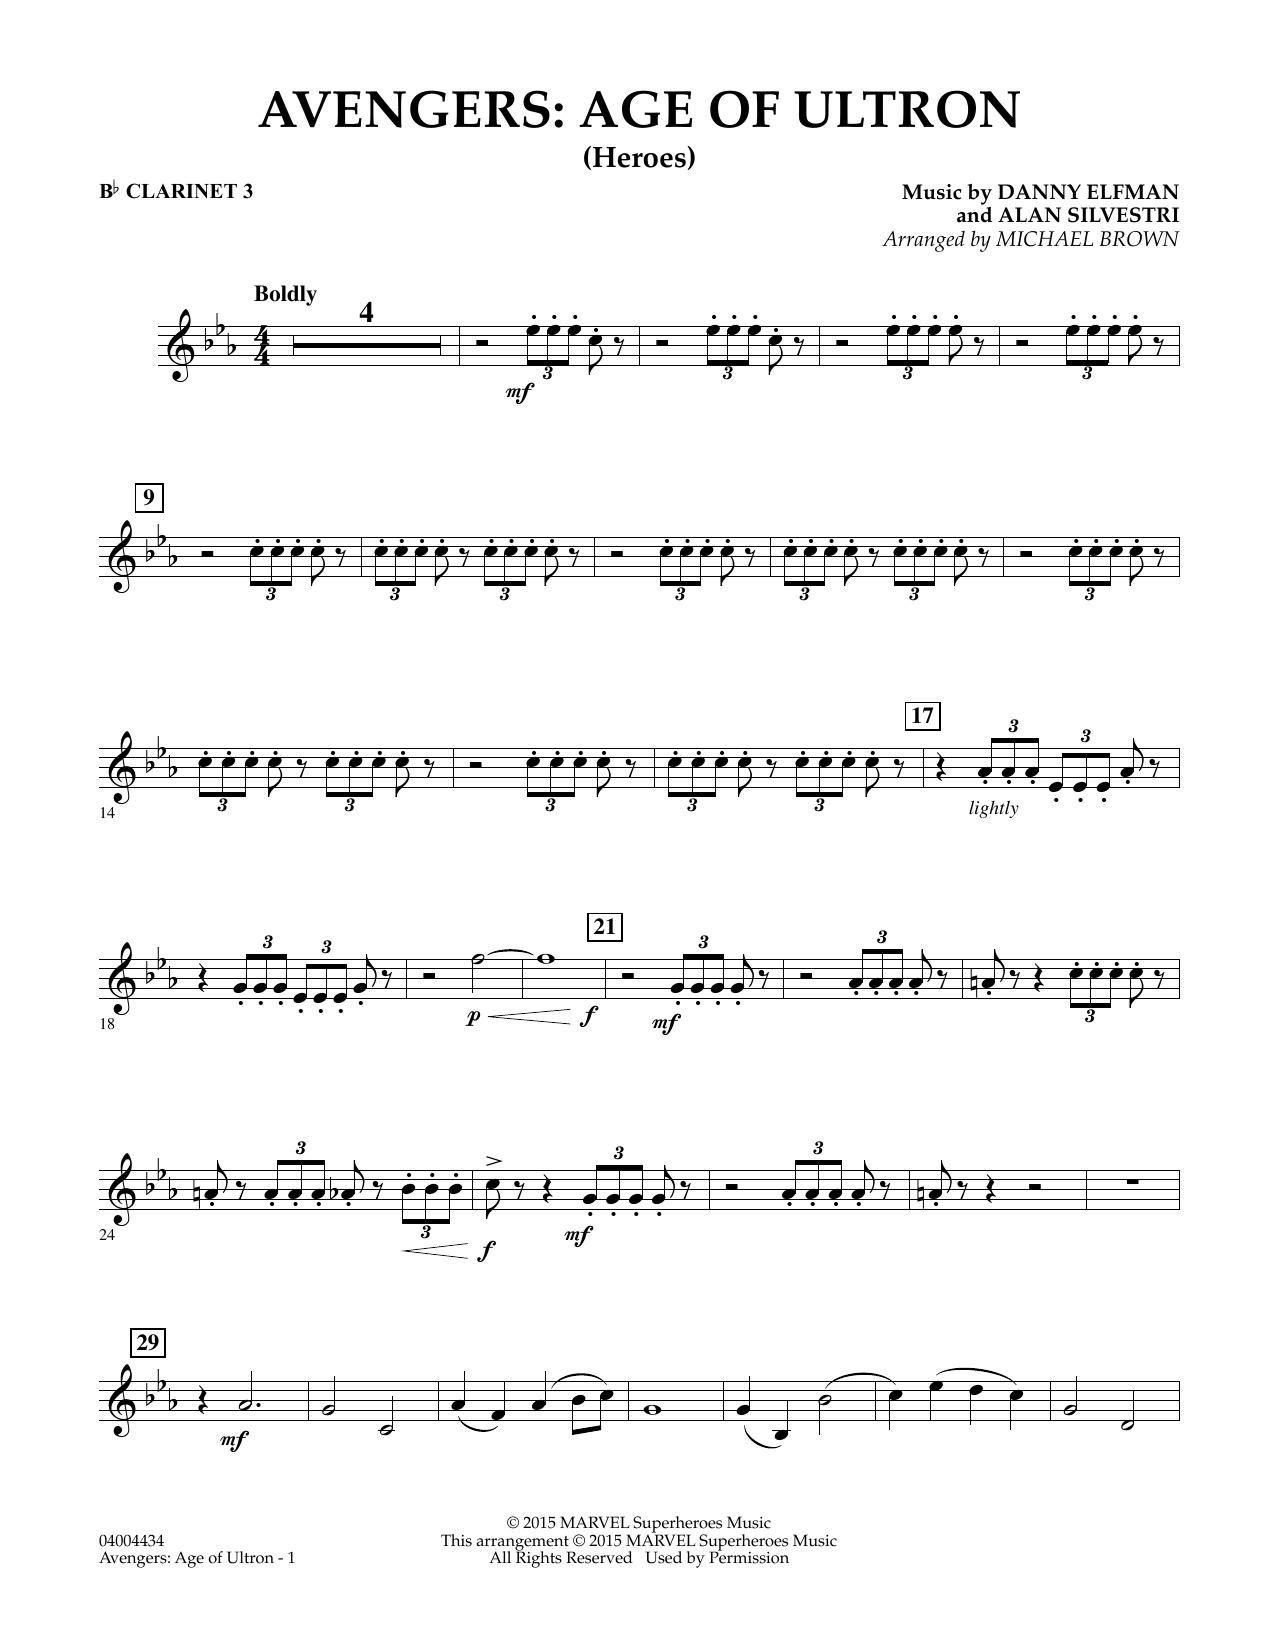 Michael Brown Avengers: The Age of Ultron (Main Theme) - Bb Clarinet 3 sheet music notes and chords. Download Printable PDF.